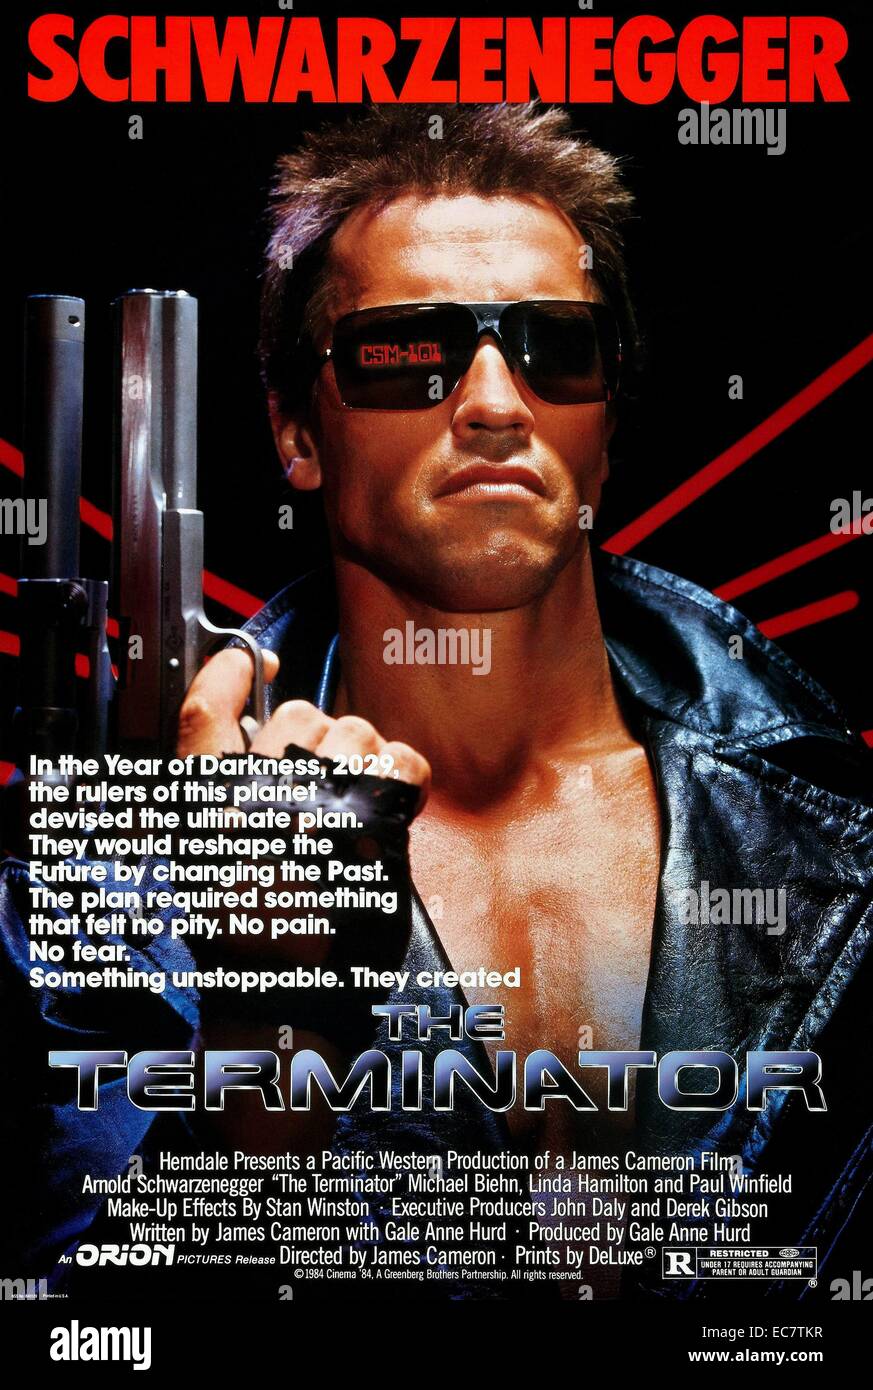 The Terminator is a 1984 American science fiction action film directed by James Cameron, written by Cameron and the film's producer Gale Anne Hurd, and starring Arnold Schwarzenegger, Michael Biehn, Linda Hamilton and Paul Winfield. The film tells the story of the Terminator, a cyborg assassin sent back in time from the year 2029 to 1984 to kill Sarah Connor. Stock Photo